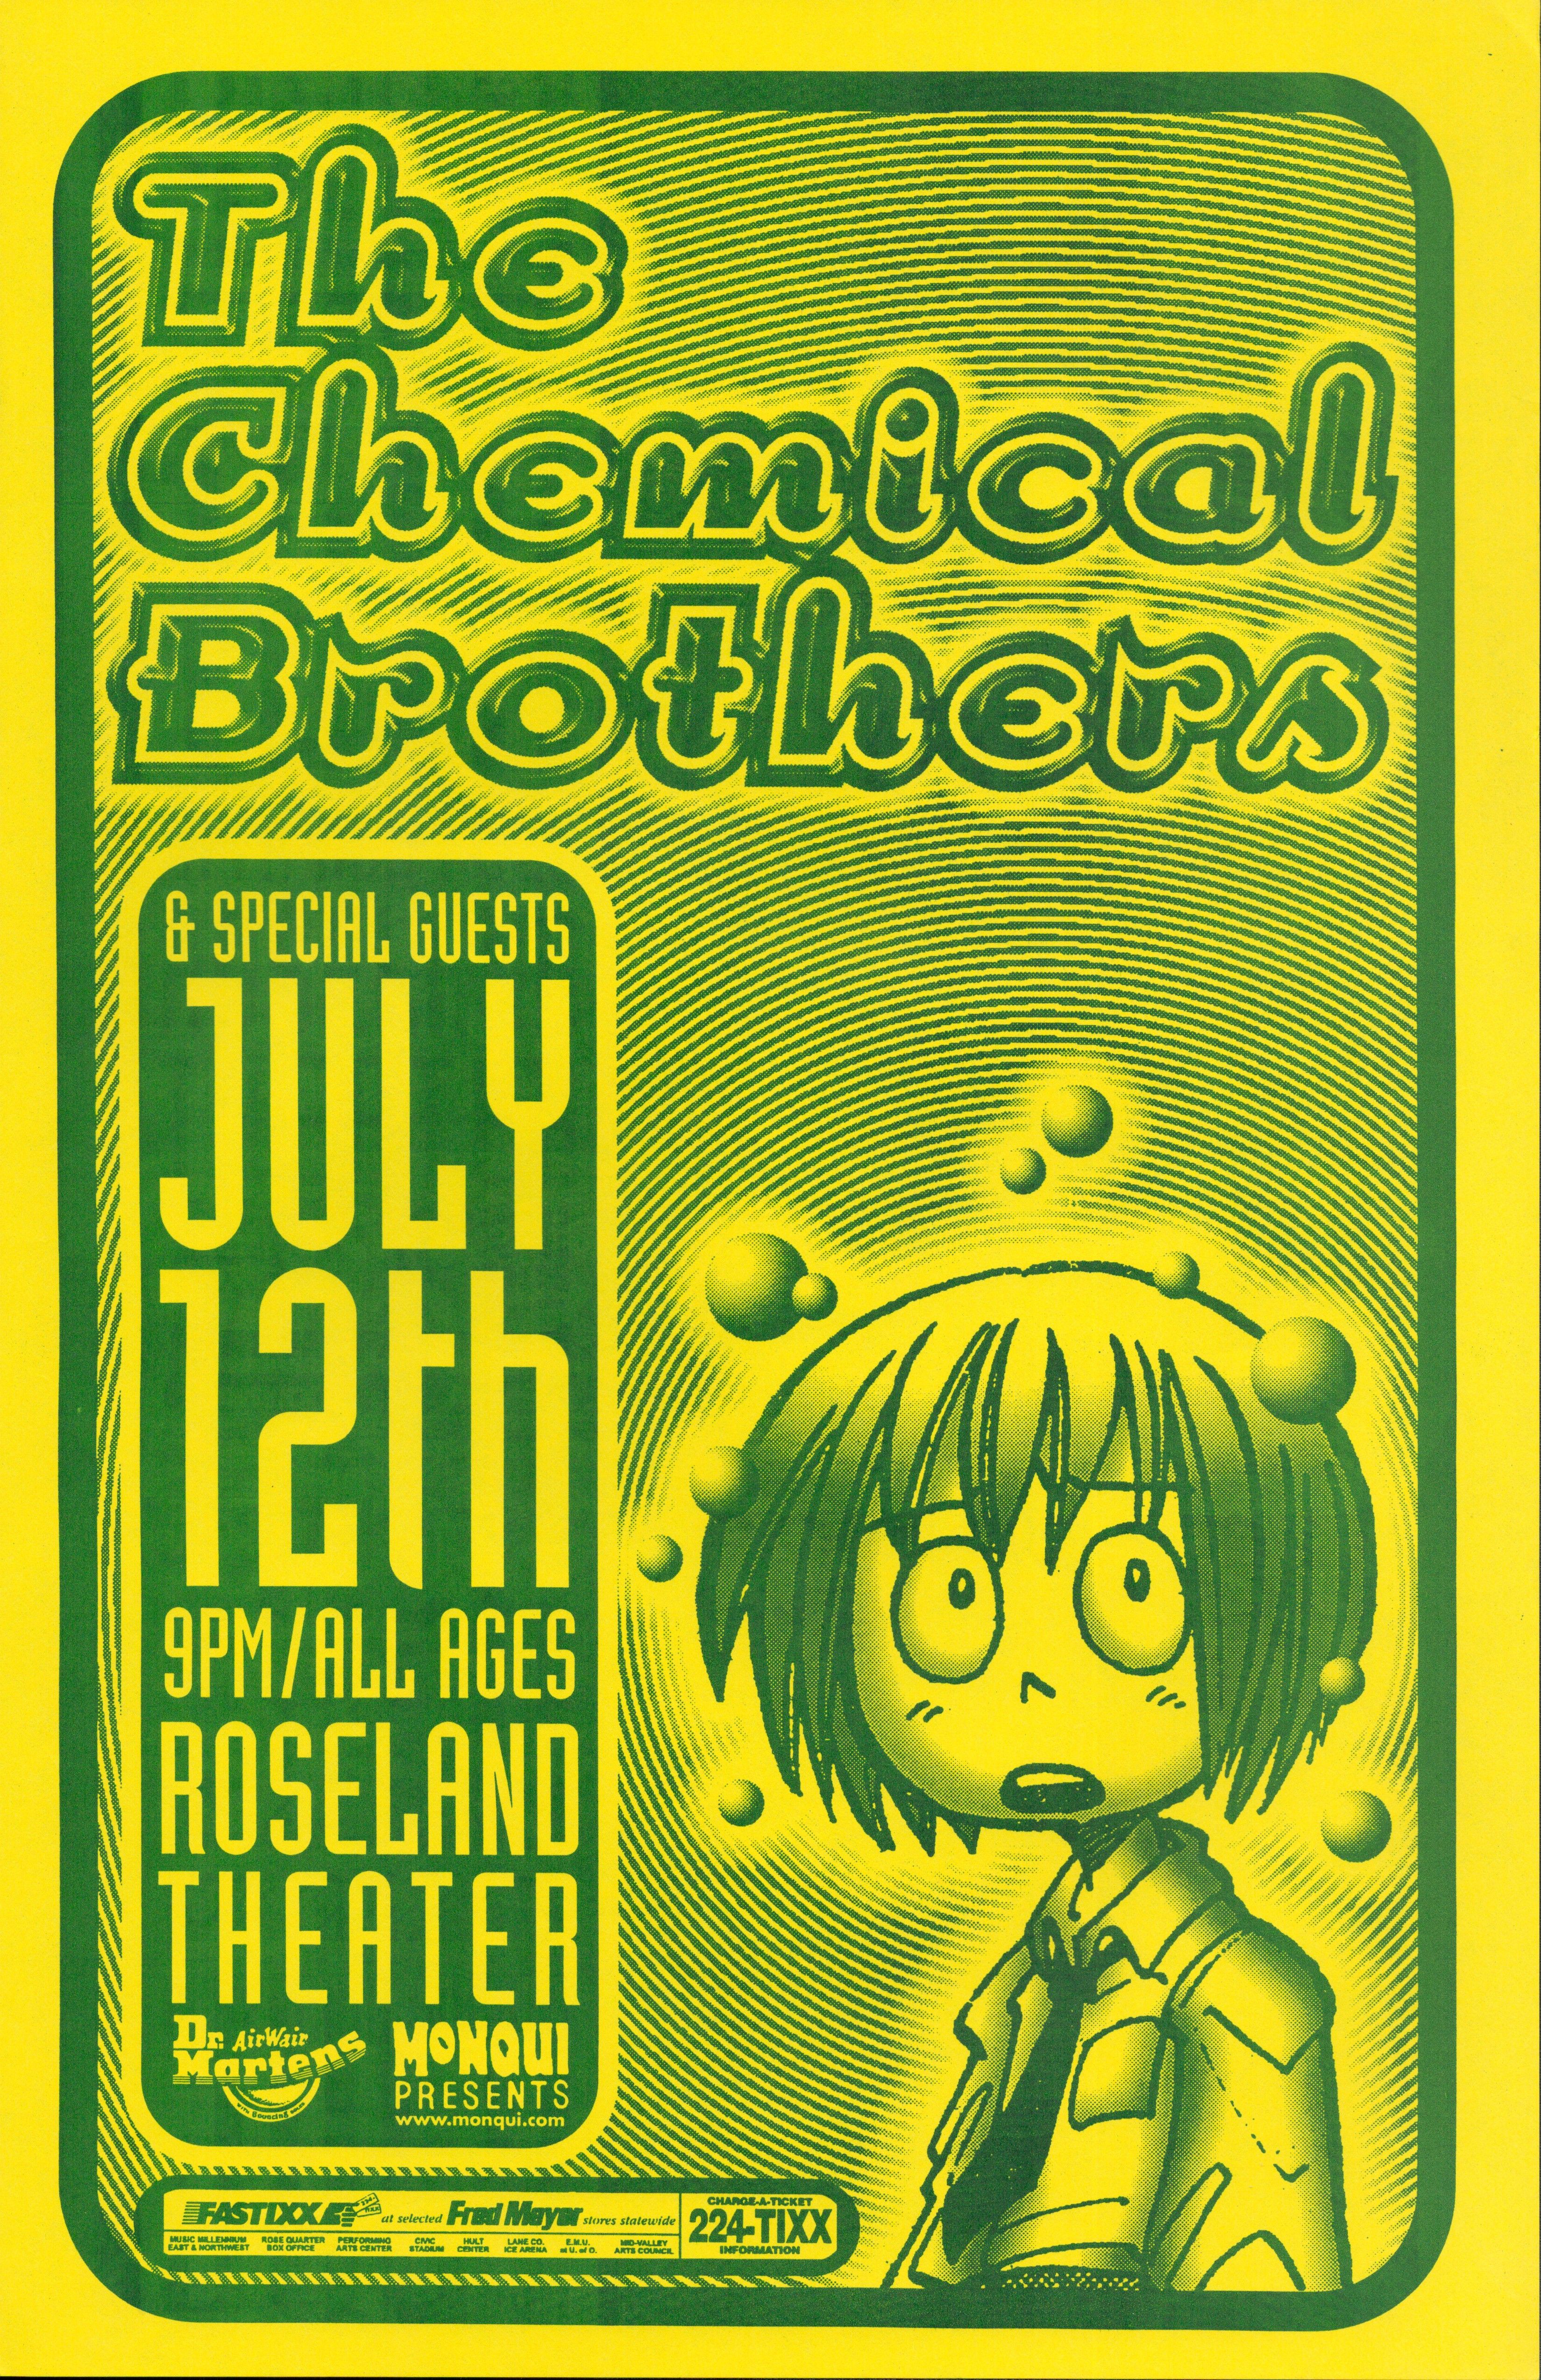 MXP-221.4 The Chemical Brothers Roseland Theater 1999 Concert Poster